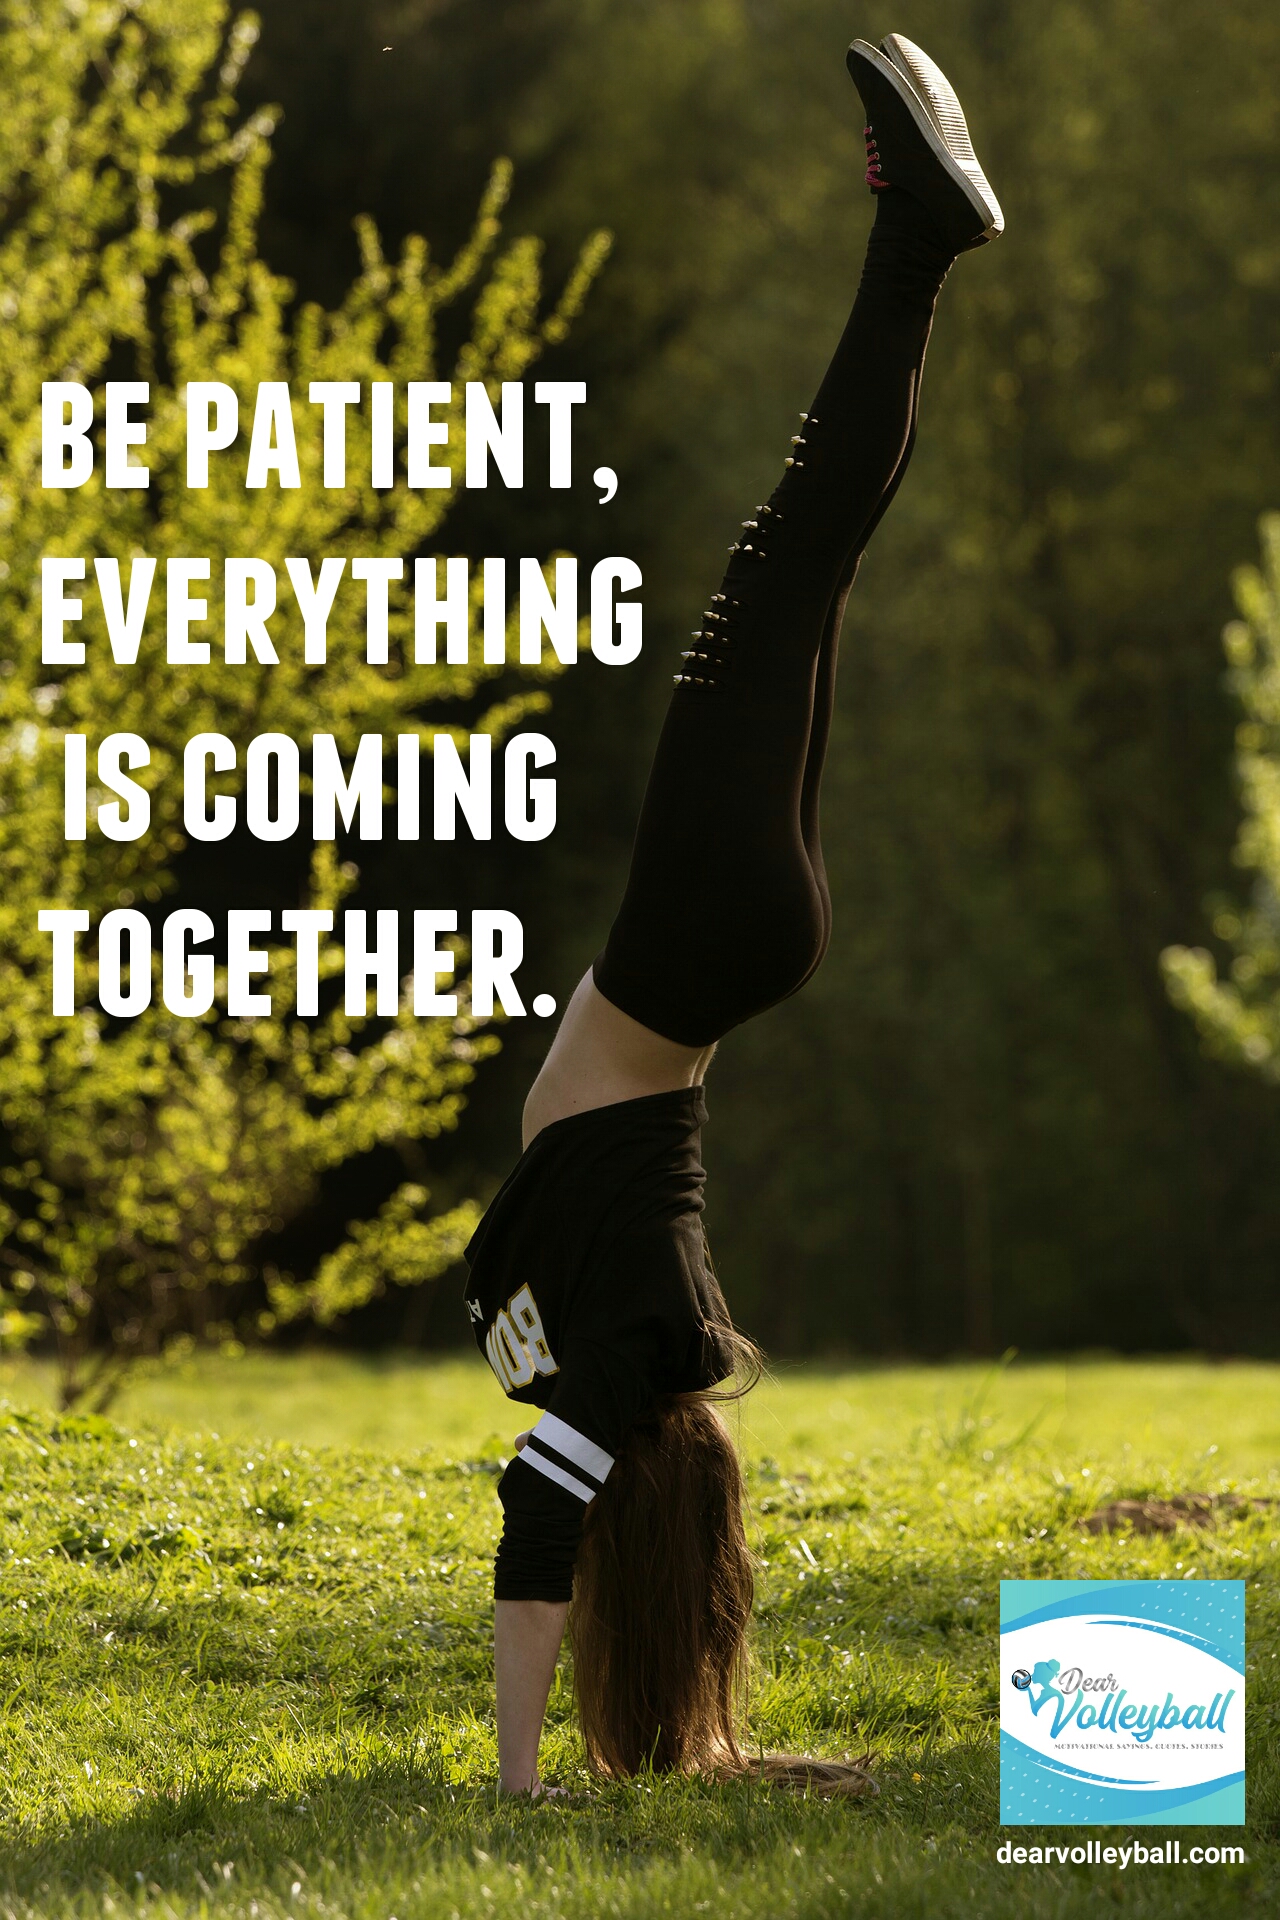 "Be patient. Everything is coming together." and other strong girls pictures paired with an inspirational volleyball quote on Dear Volleyball.com.